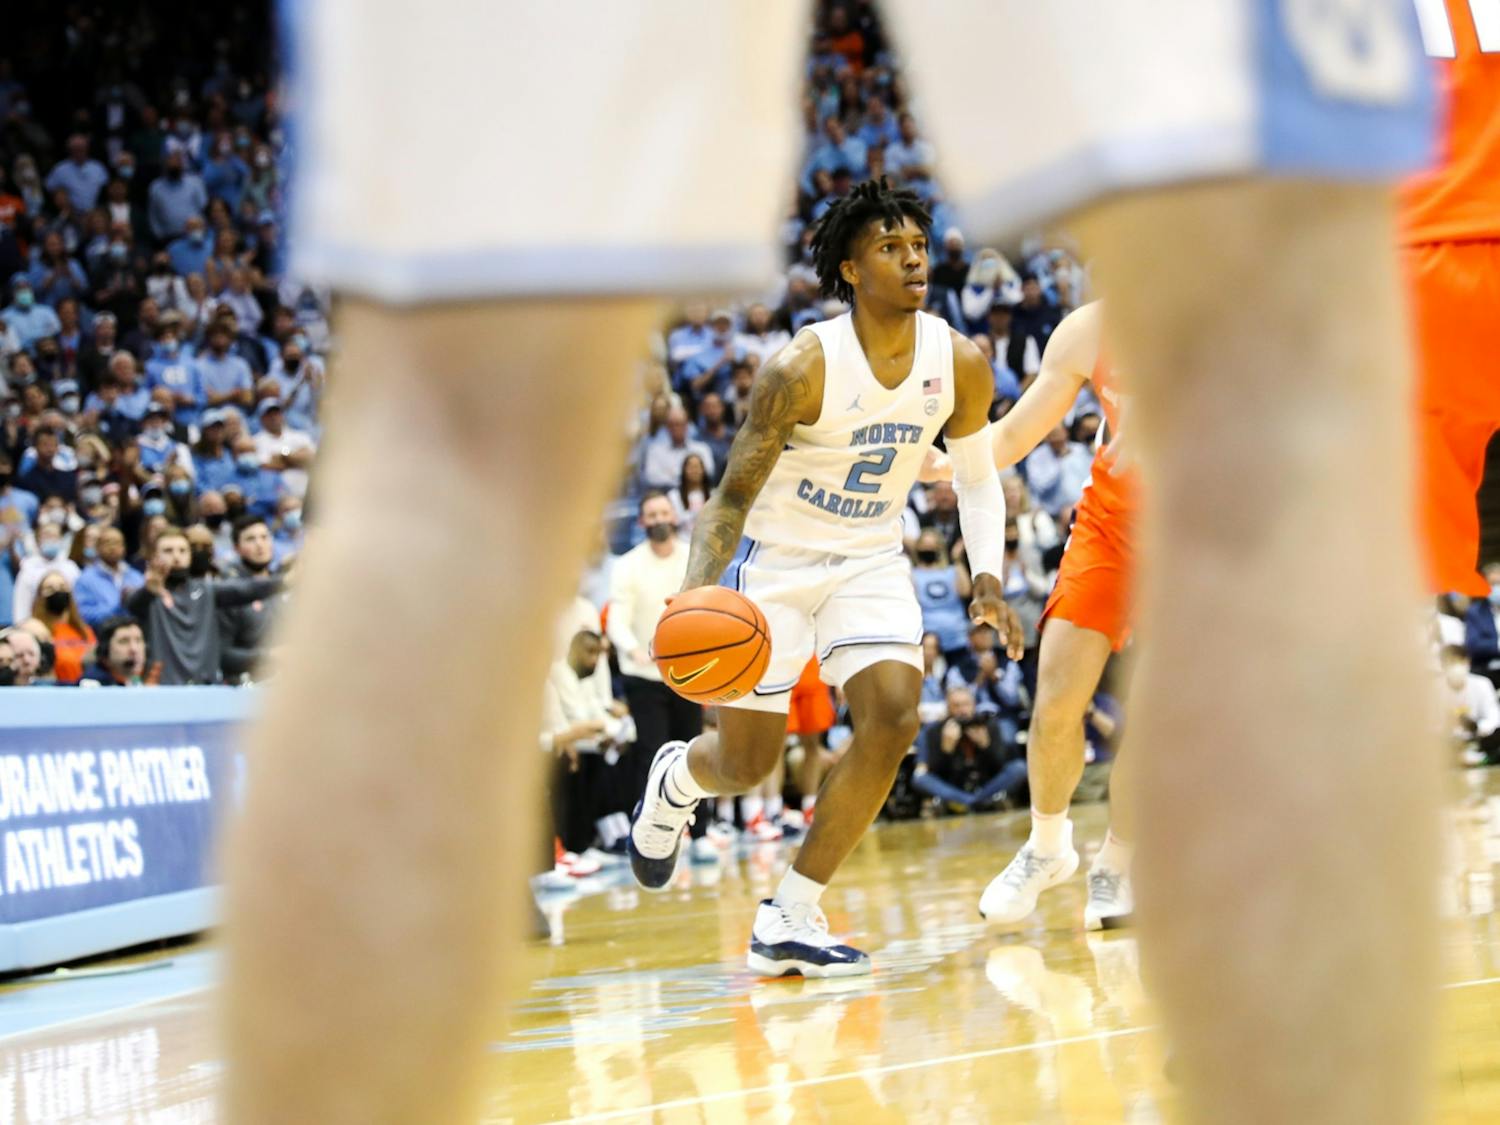 UNC sophomore guard Caleb Love (2) opens a possession during a men's basketball game against Syracuse on Monday, Feb. 28, 2022, at the Dean Smith Center. UNC won 88-79.